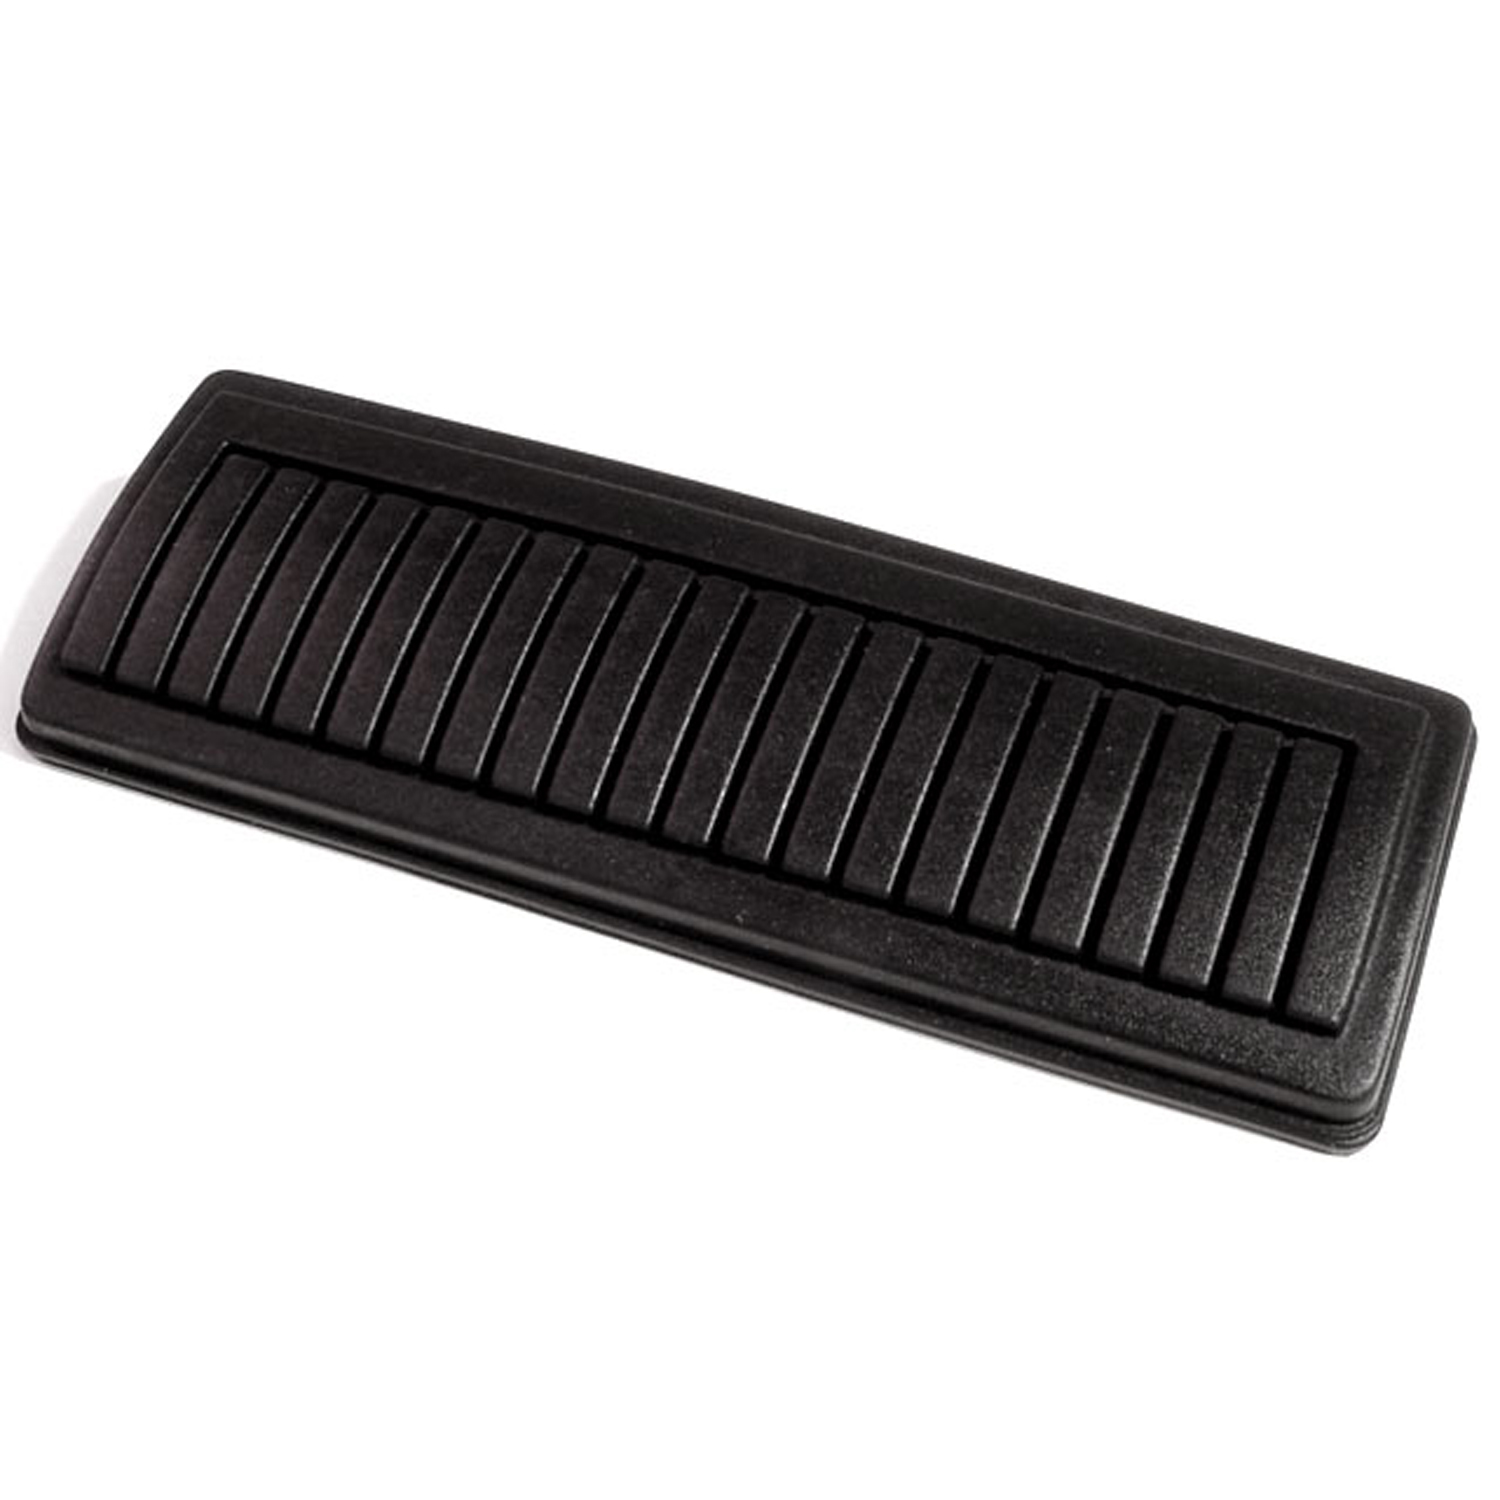 1966 Plymouth Satellite Brake Pedal Pad, for models with automatic transmission-CB 200